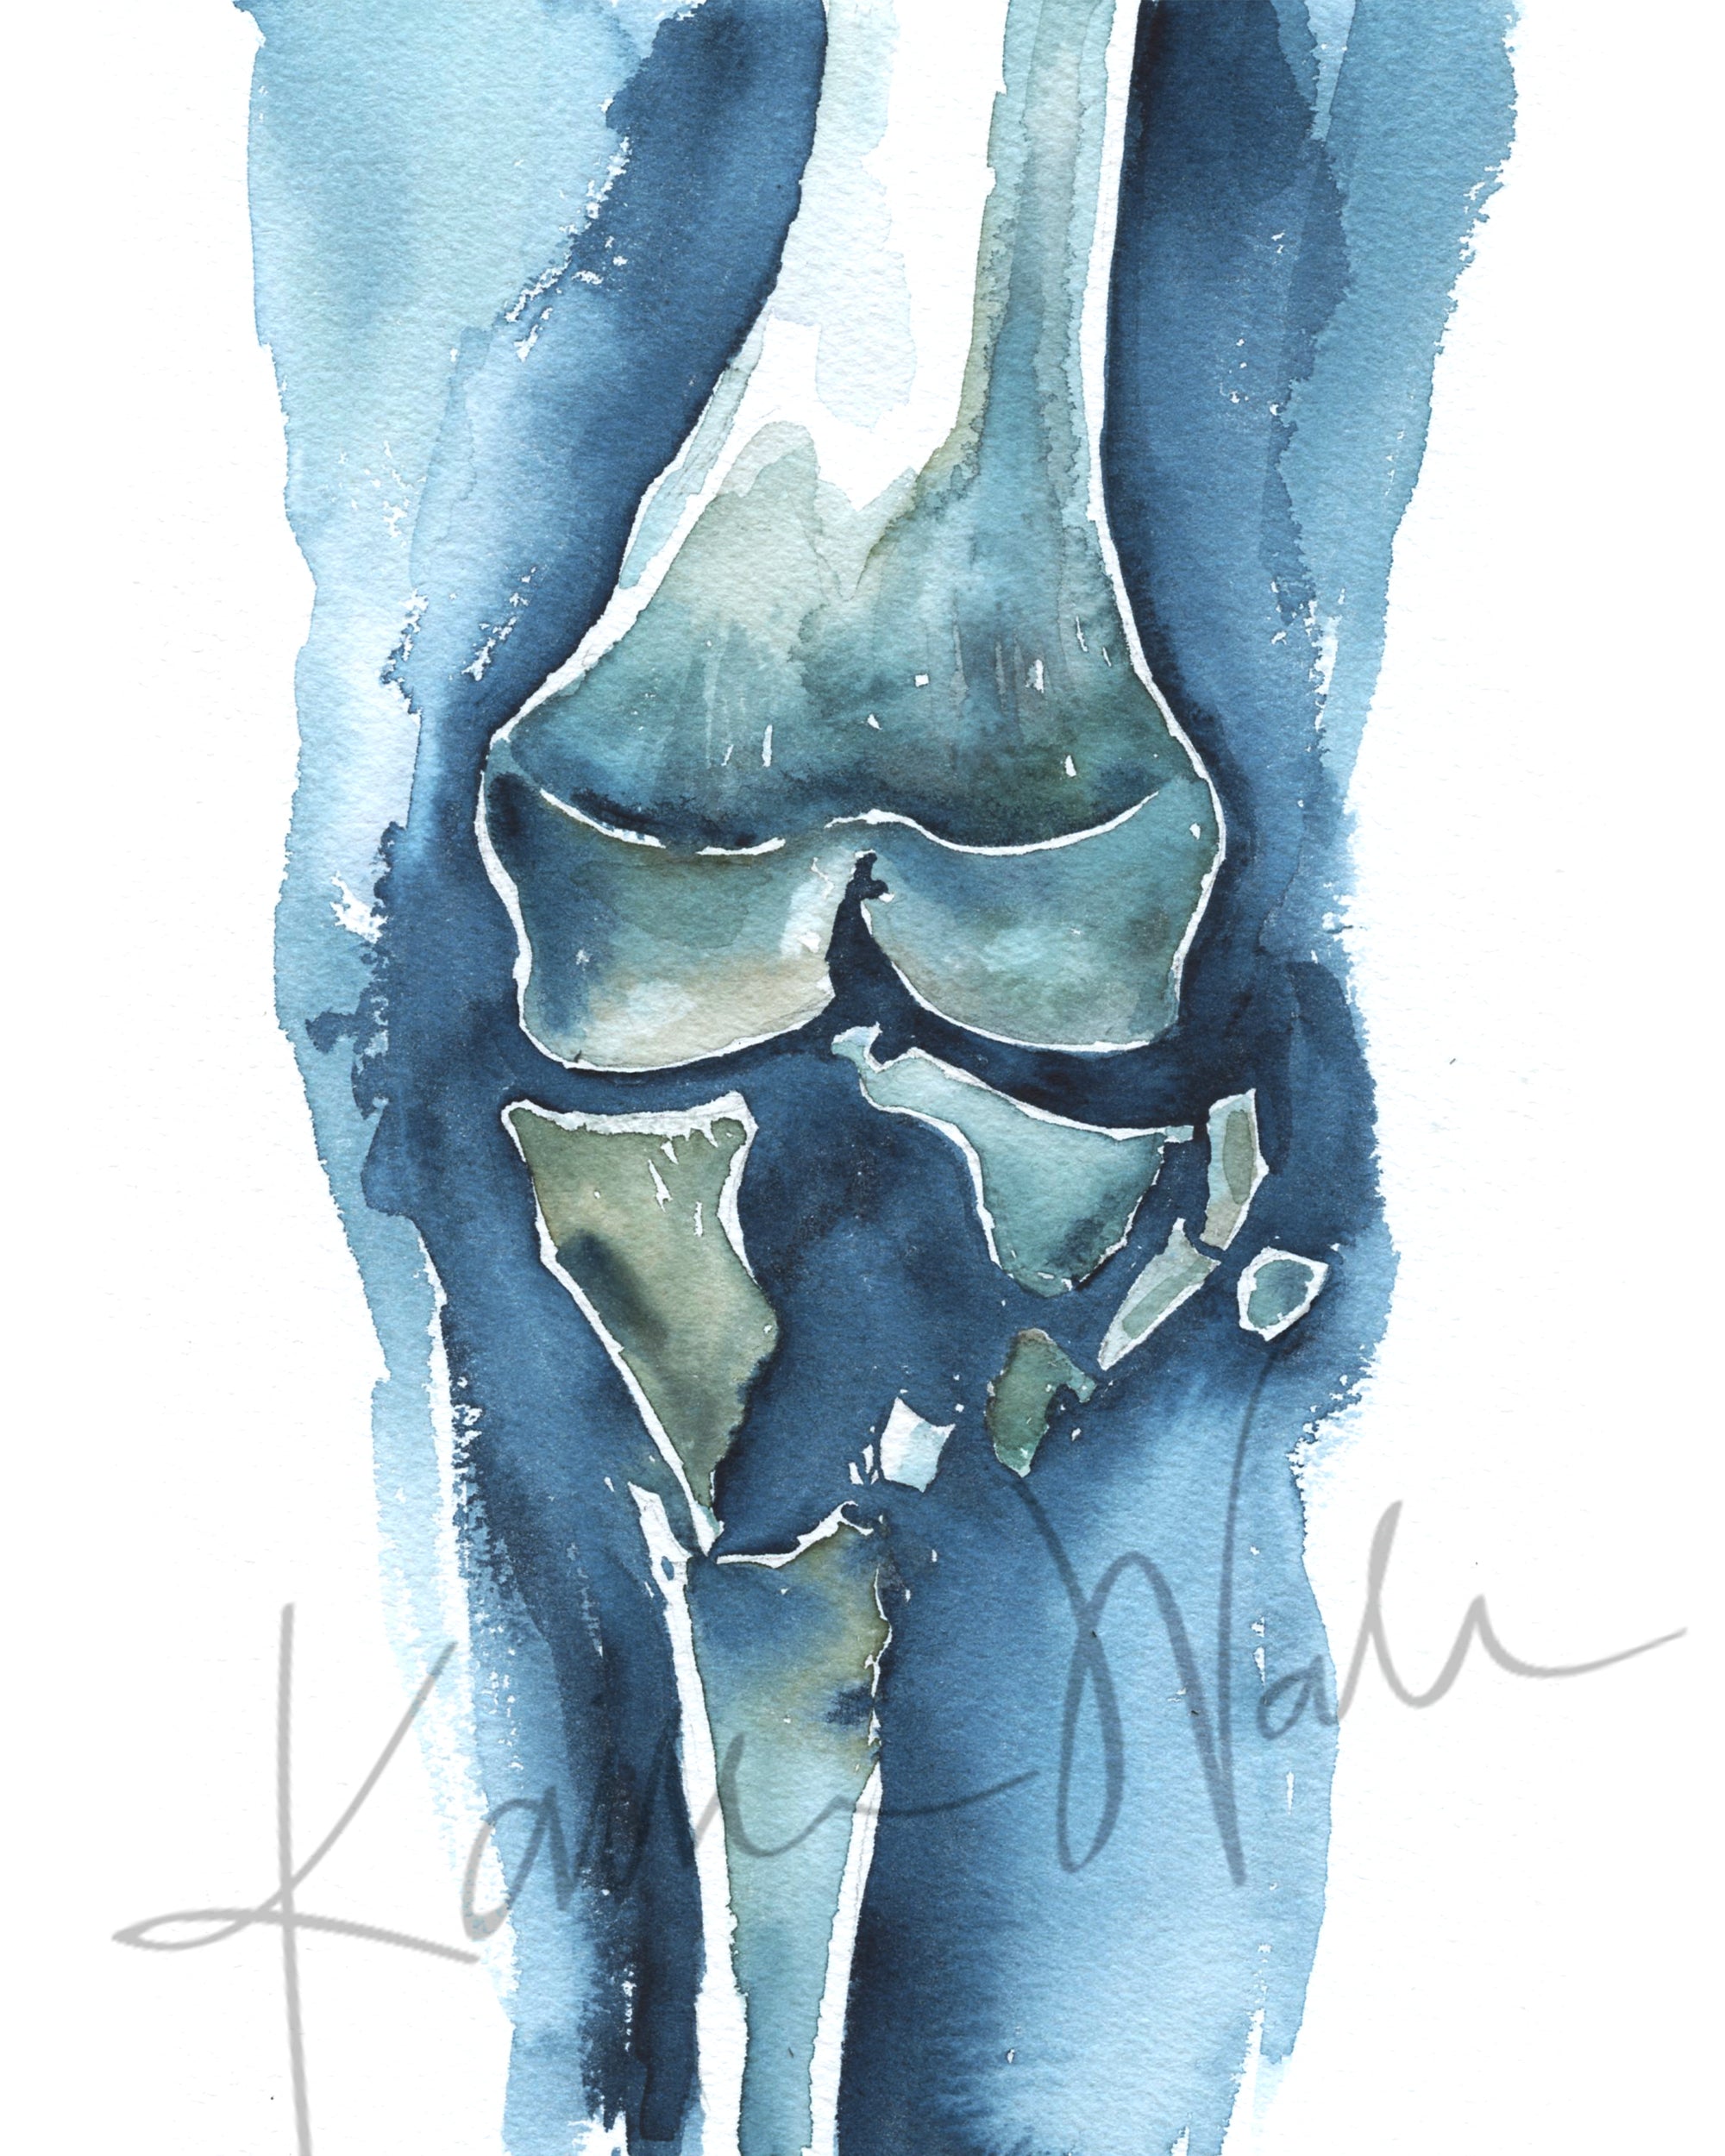 Unframed watercolor painting of a shattered knee.